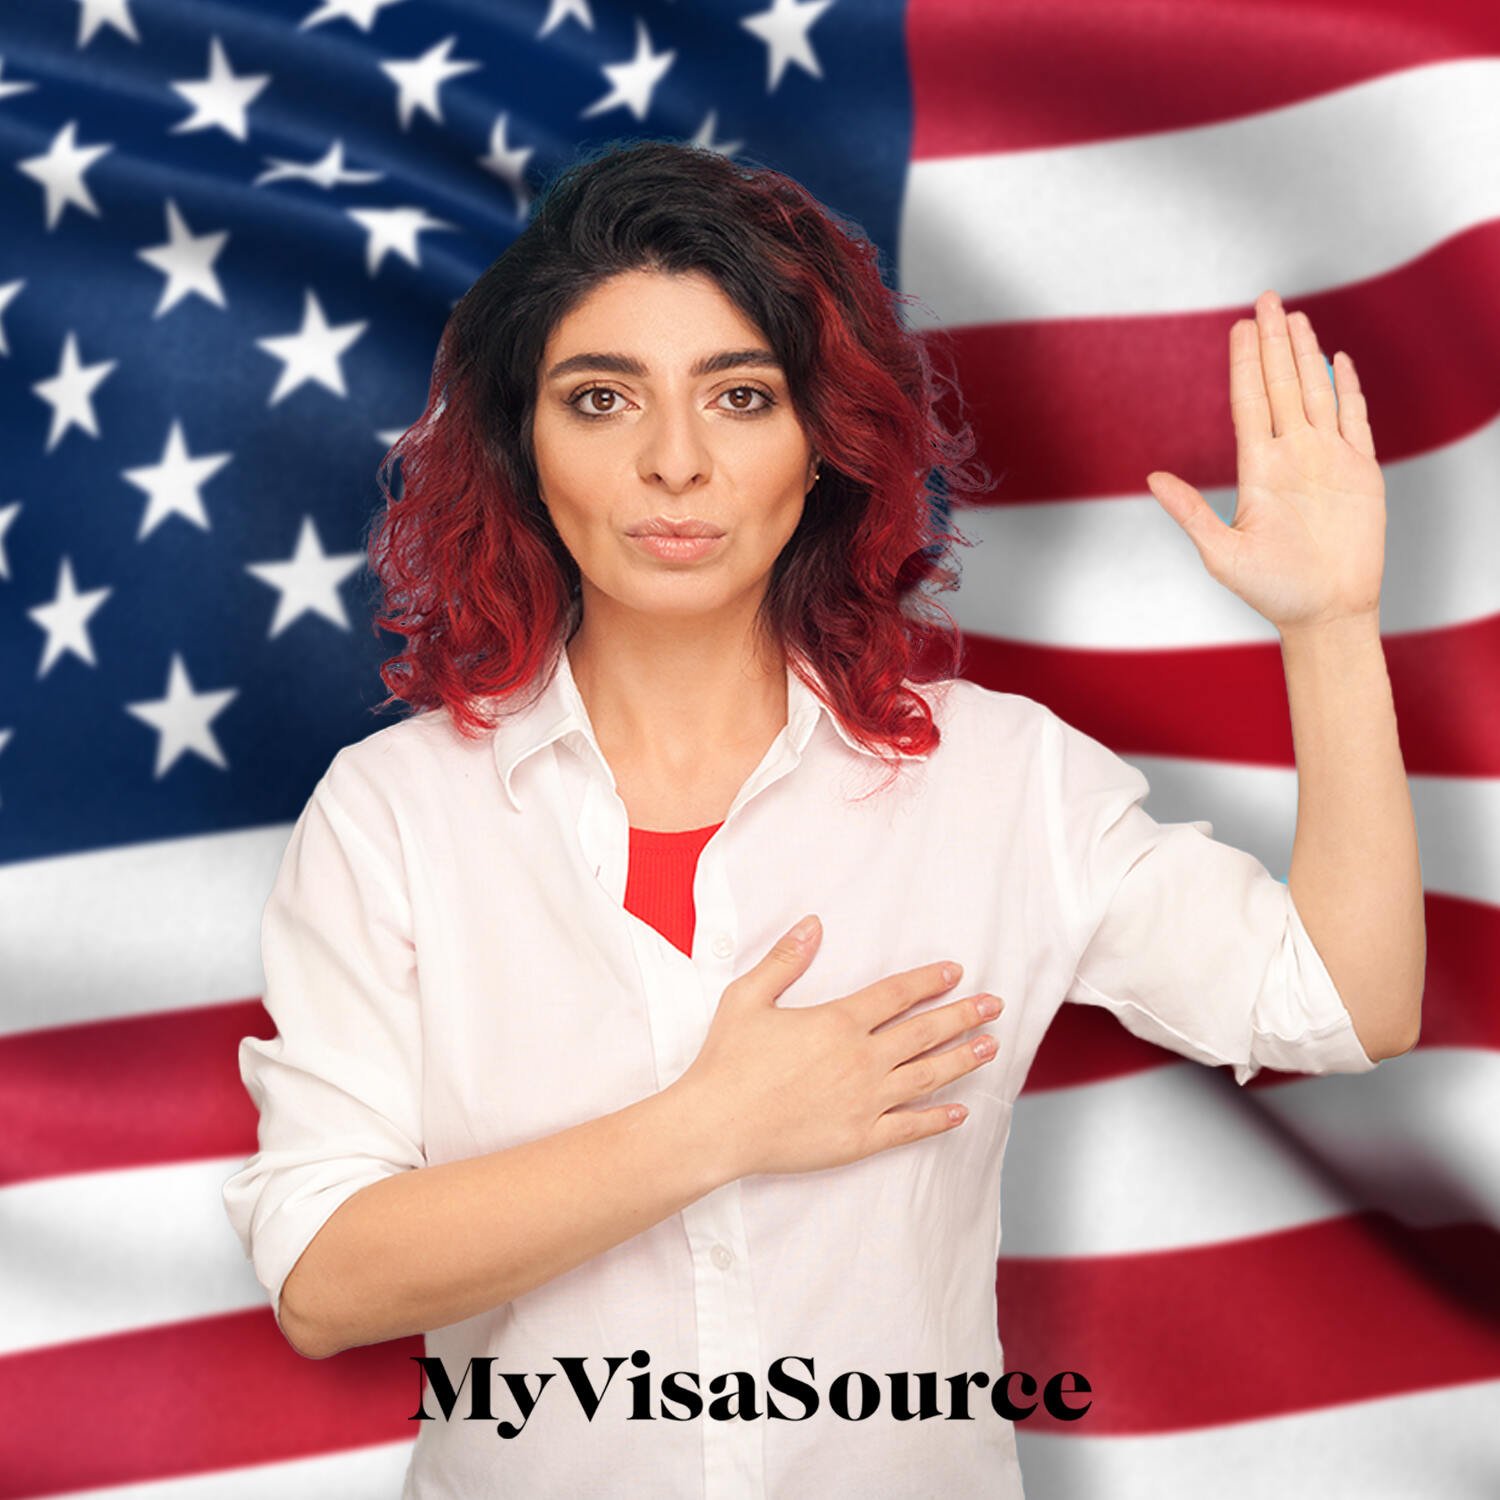 middle eastern woman holding left hand up with us flag background